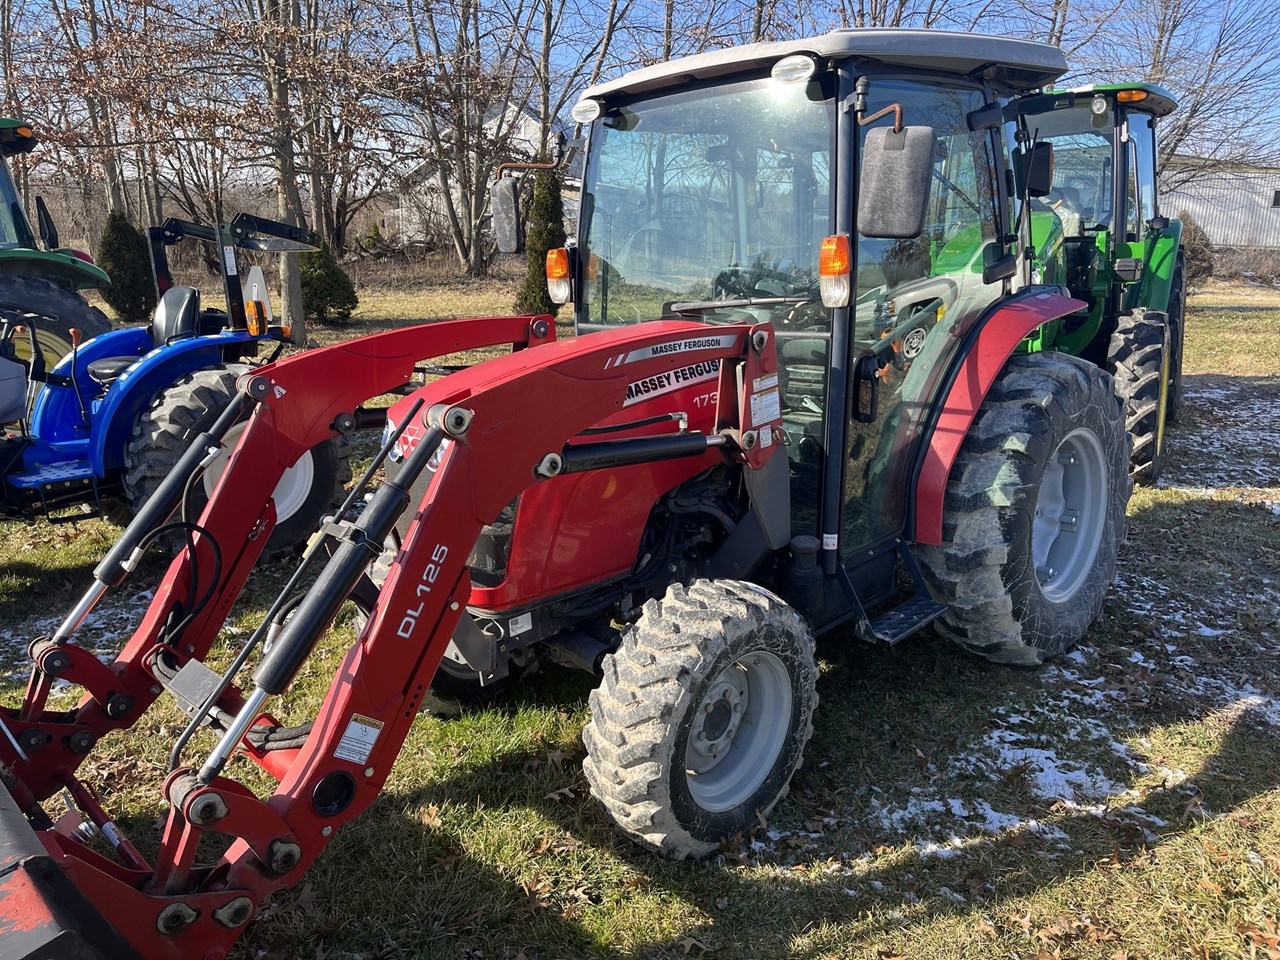 2015 Massey Ferguson 1736 Tractor - Compact Utility For Sale